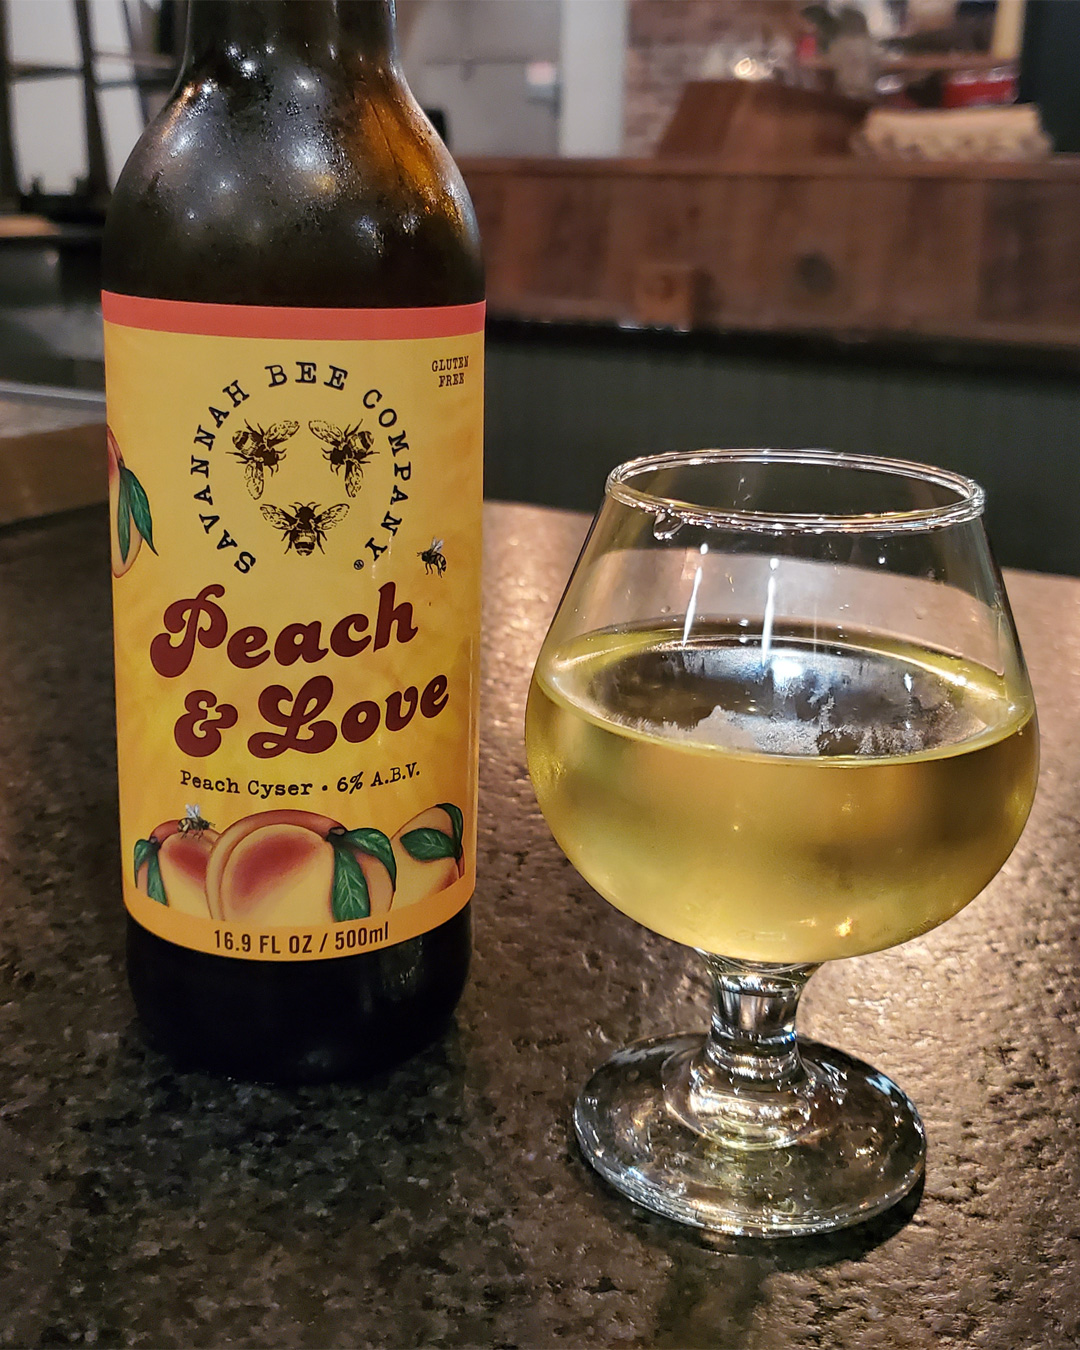 NOLADrinks Show – Craft Beer Industry – Oct20Ep2 – “Peach and Love” mead from the Savannah Bee Company.